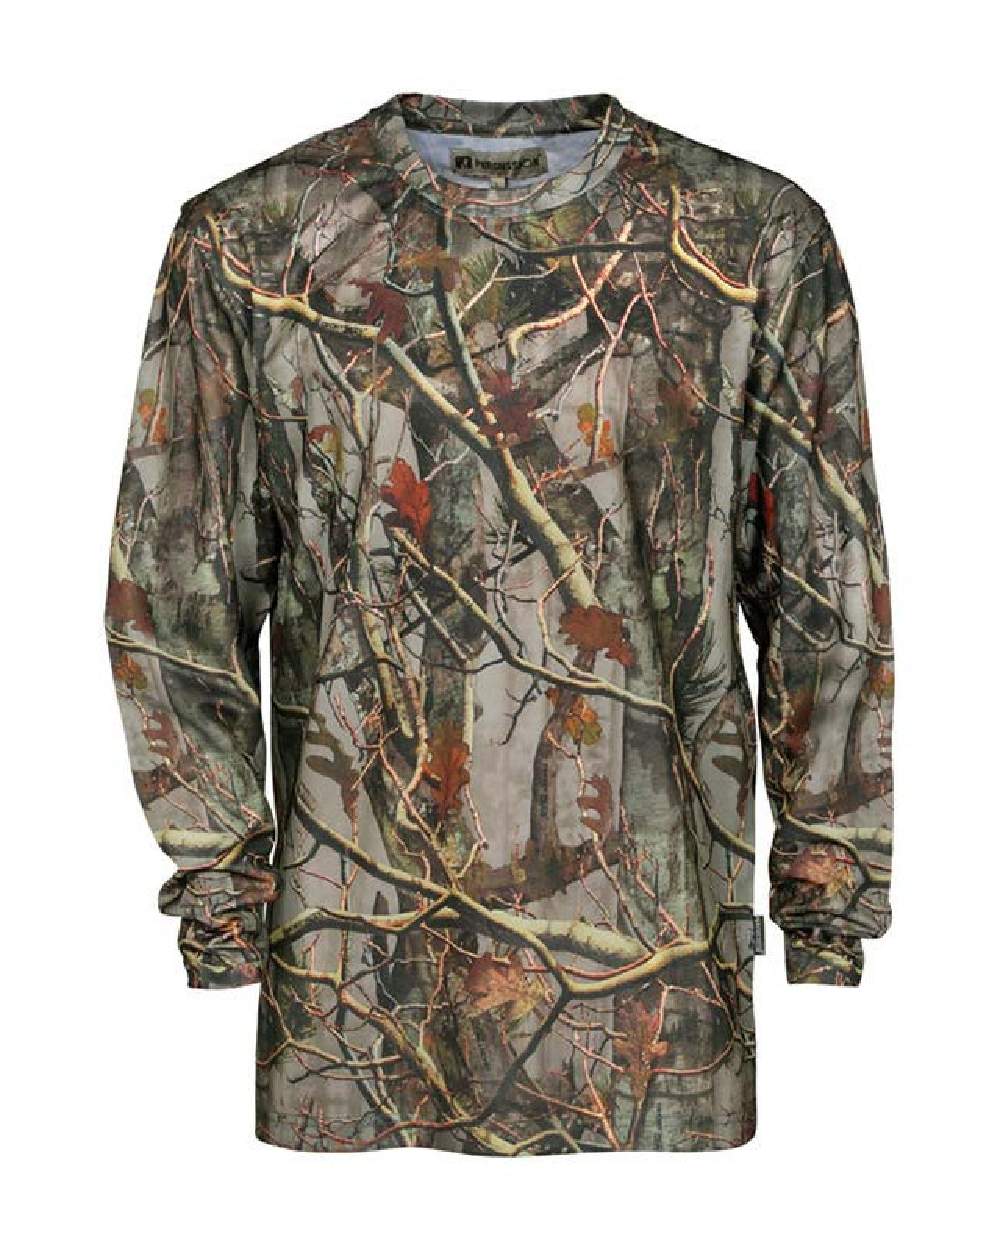 Percussion Ghostcamo Long Sleeve T-shirt in Forest Evo 